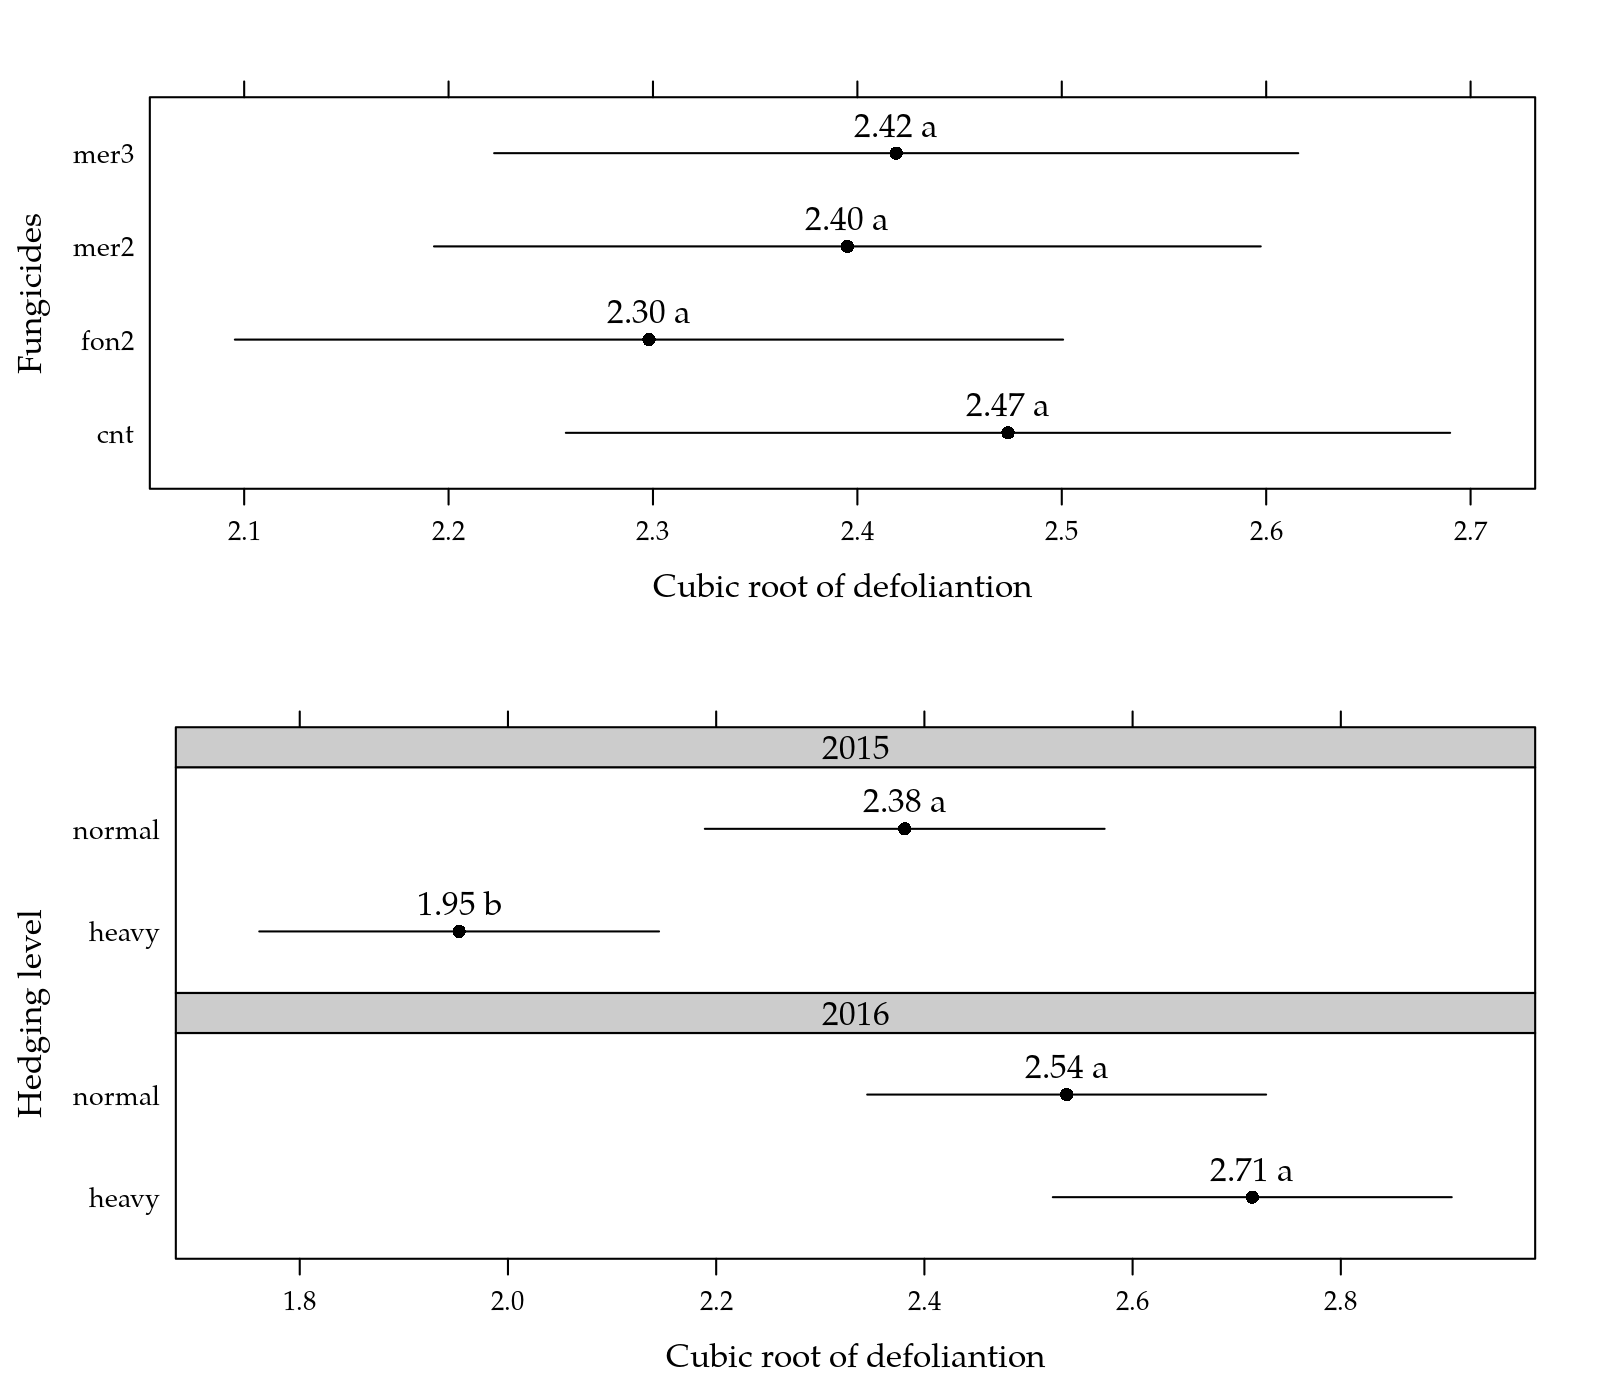 Figure  2: Cubic root means for defoliation as function of each factor levels.